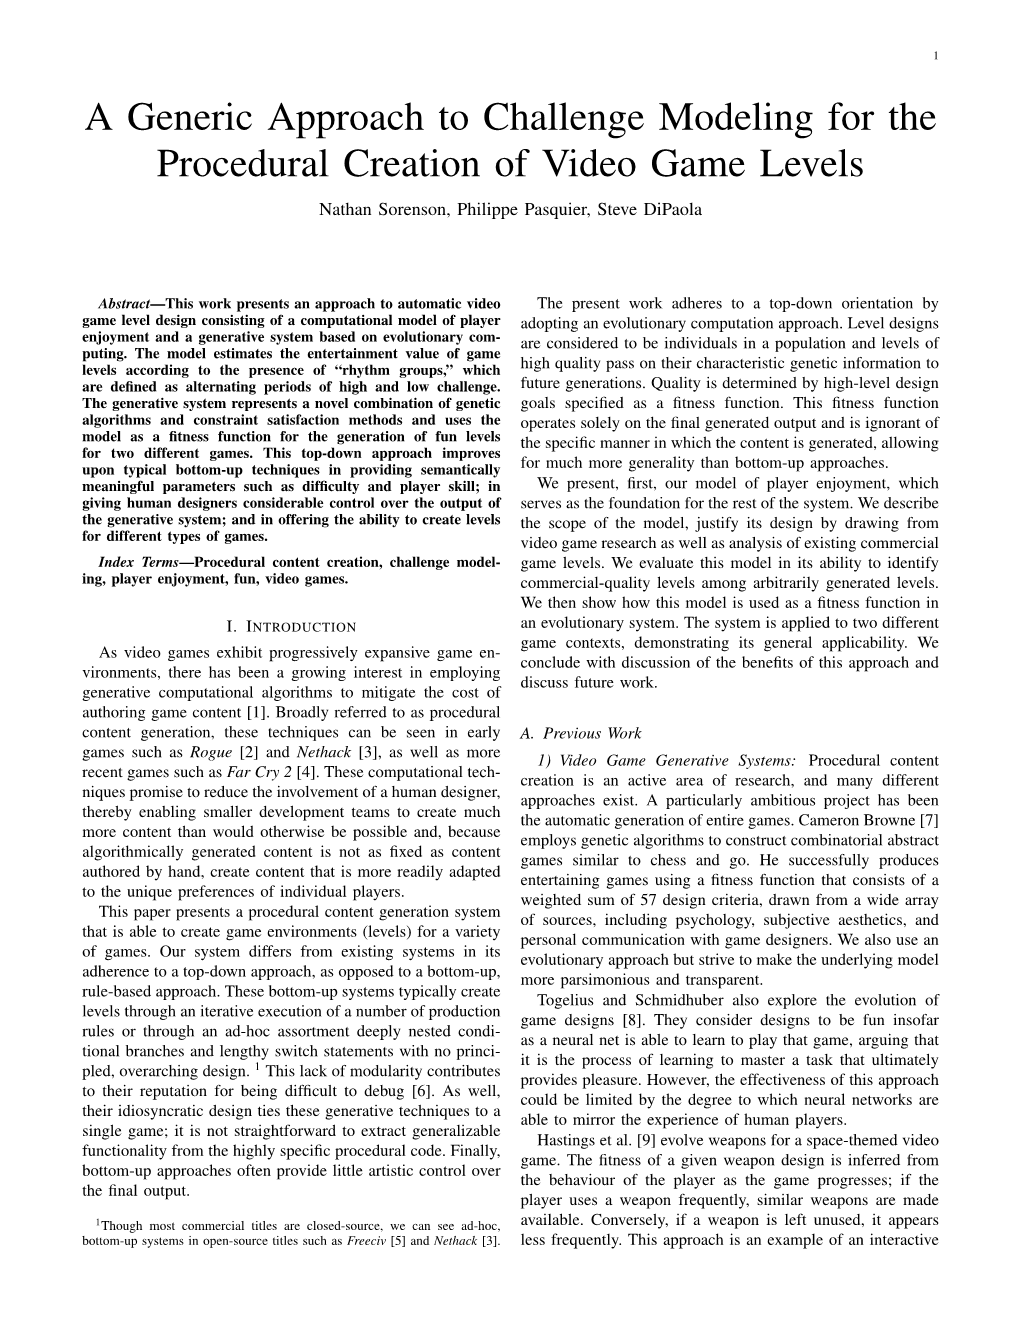 A Generic Approach to Challenge Modeling for the Procedural Creation of Video Game Levels Nathan Sorenson, Philippe Pasquier, Steve Dipaola